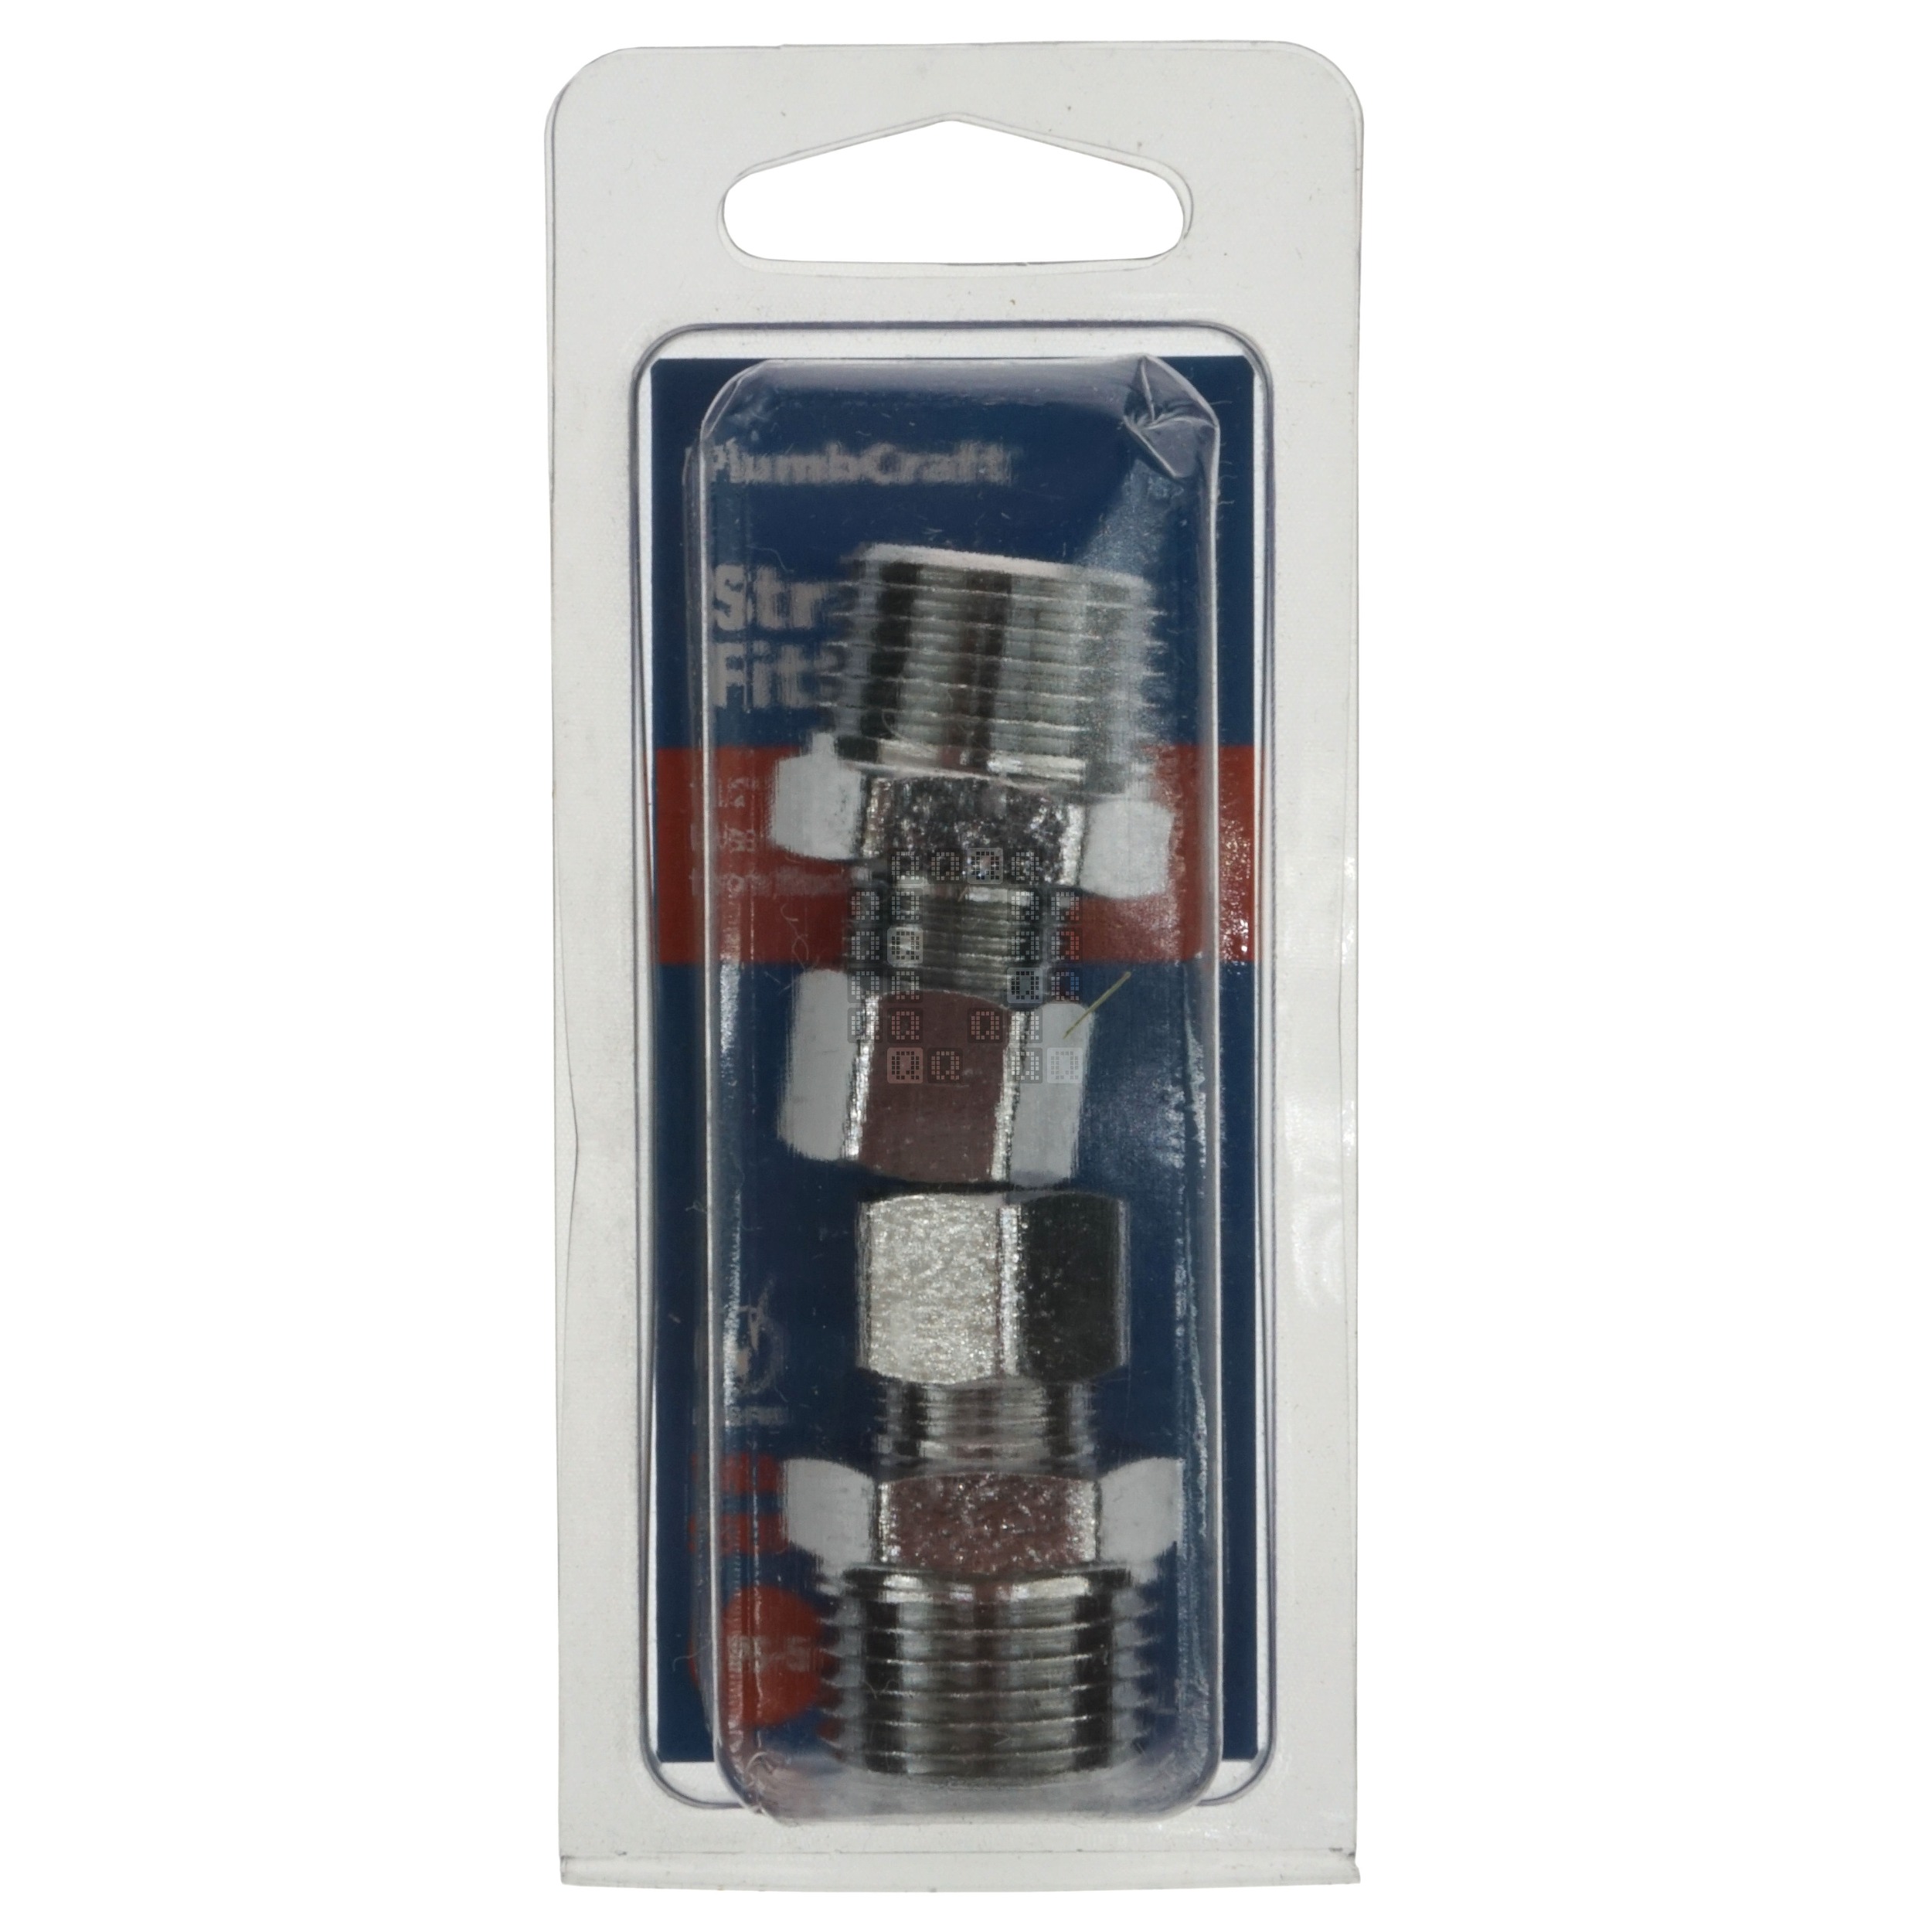 PlumbCraft 7322500LF 1/2" MIP x 3/8" OD Compression Straight Fitting, Chrome Plated, 2-Pack